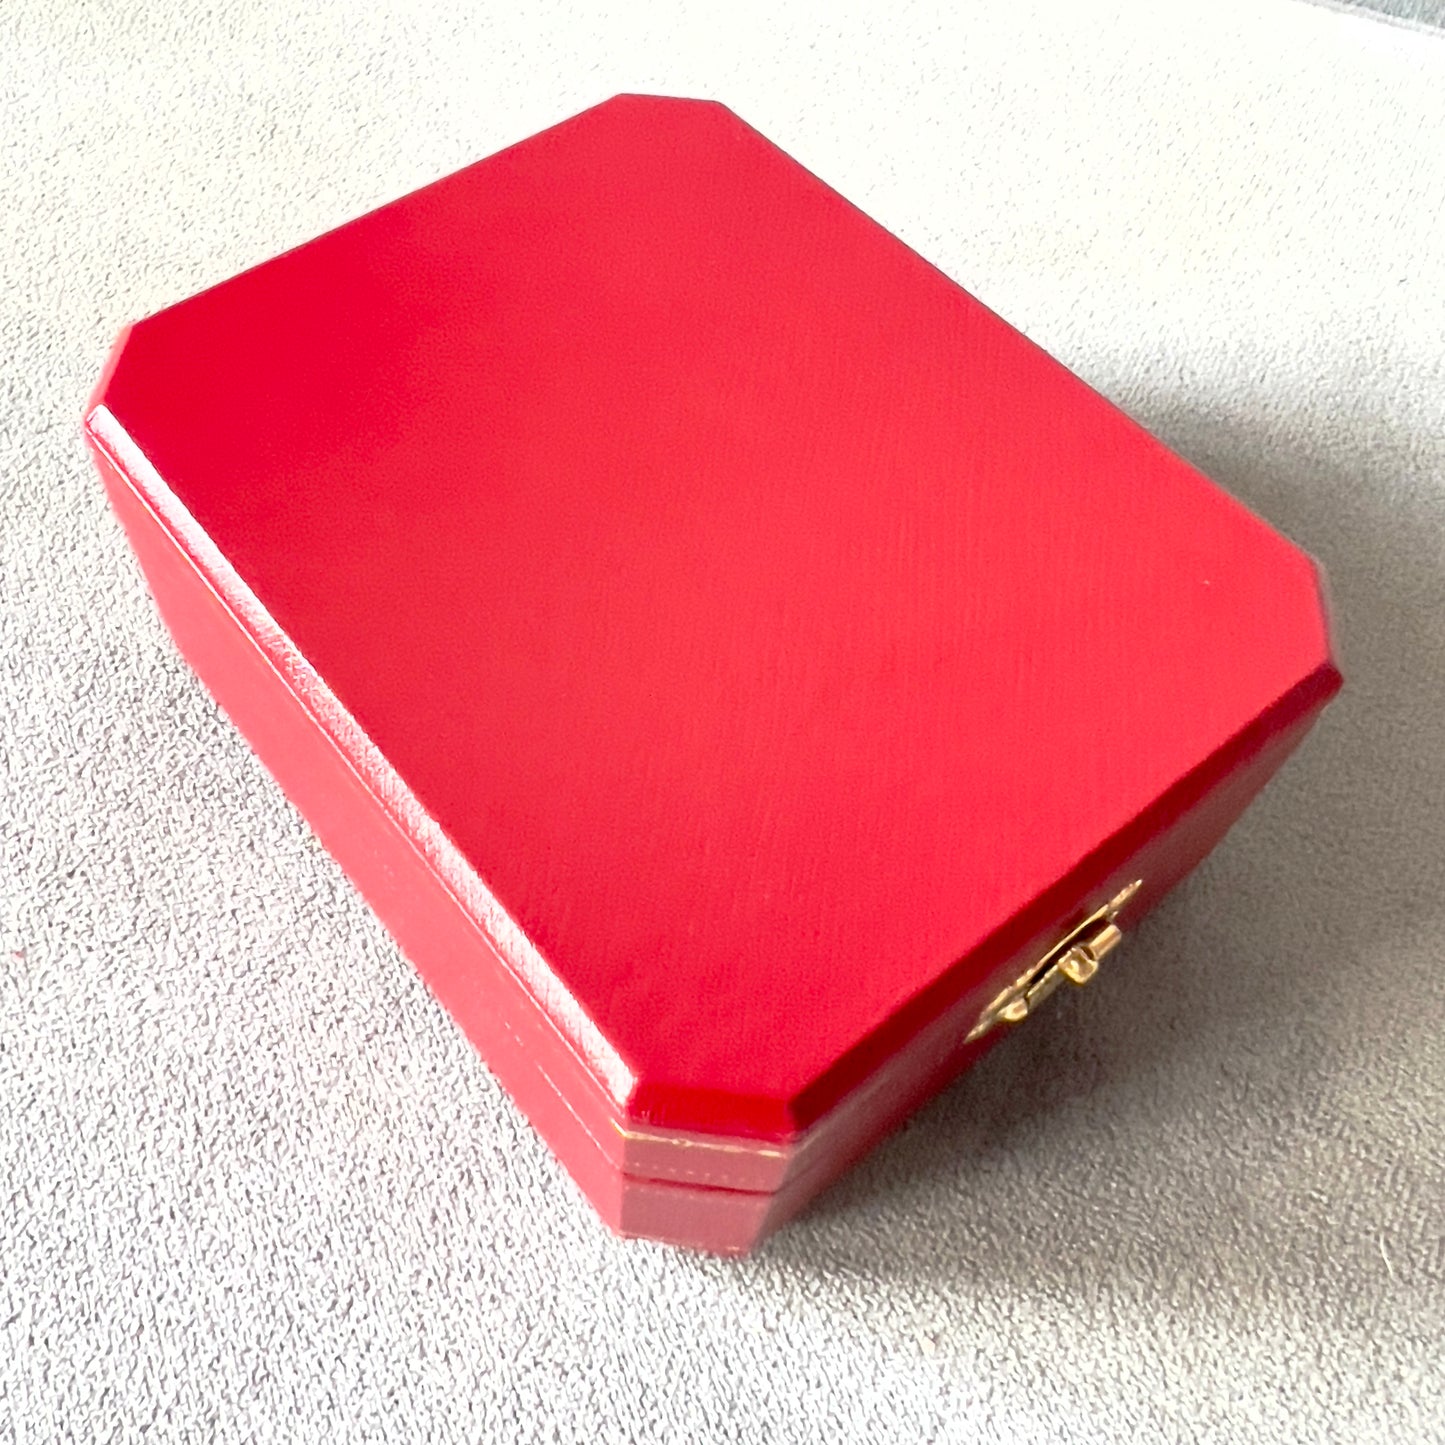 CARTIER Double Alliance Ring Box + Outer Box 4.40x3.60x1.90 inches